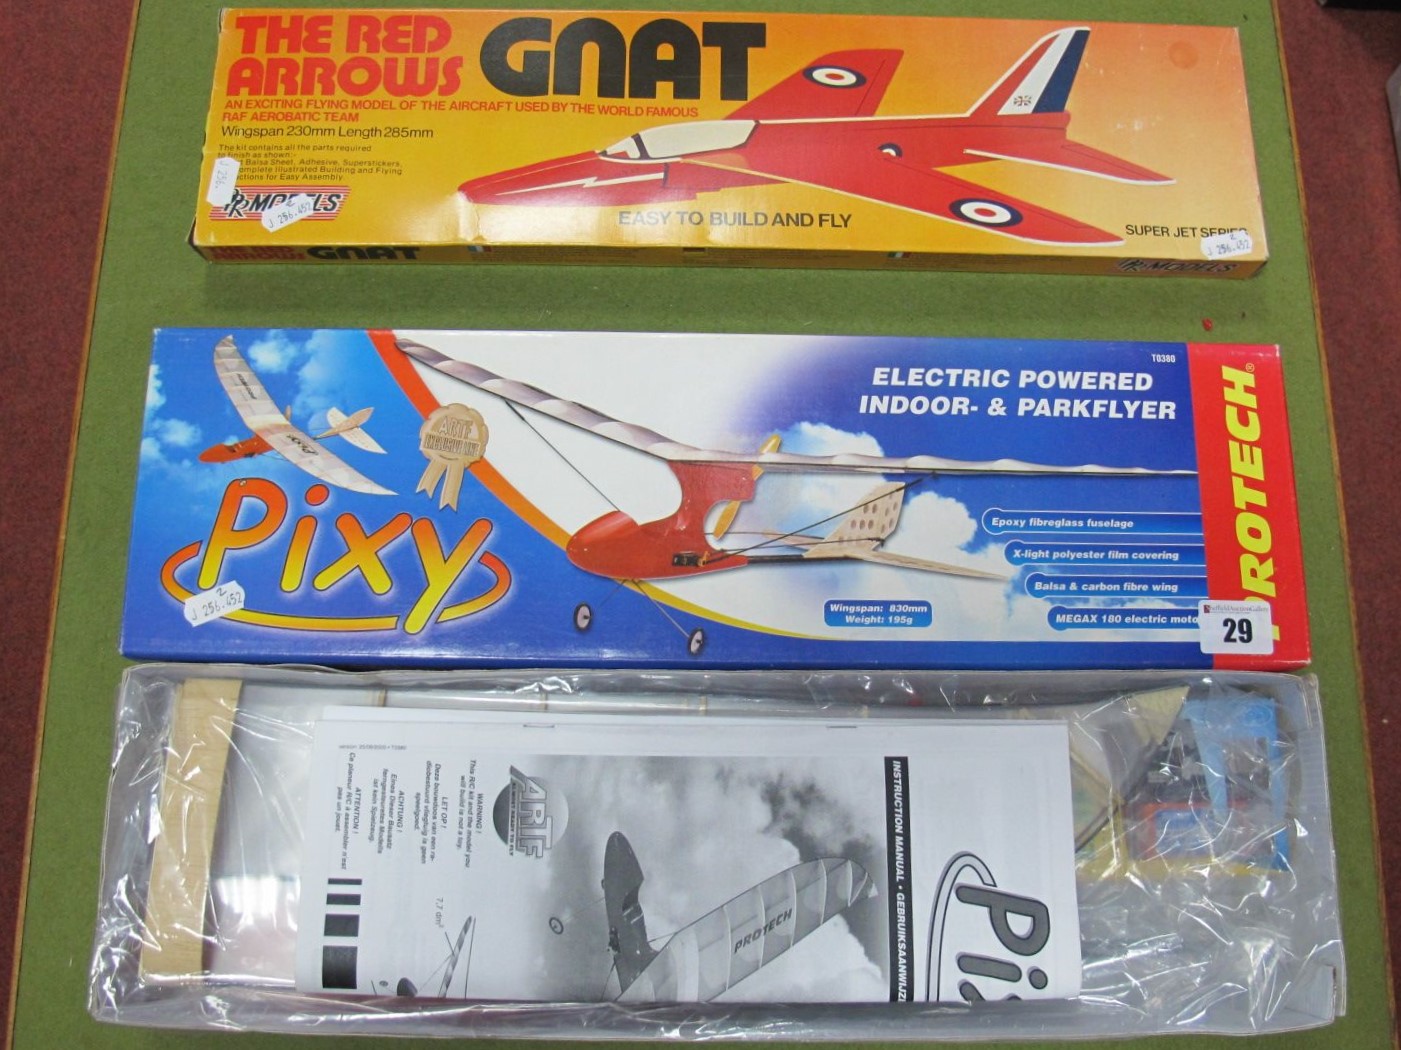 A Boxed Protech #T0380 'Pixy' Electric Powered Indoor and Park Flyer Model Aircraft, comes